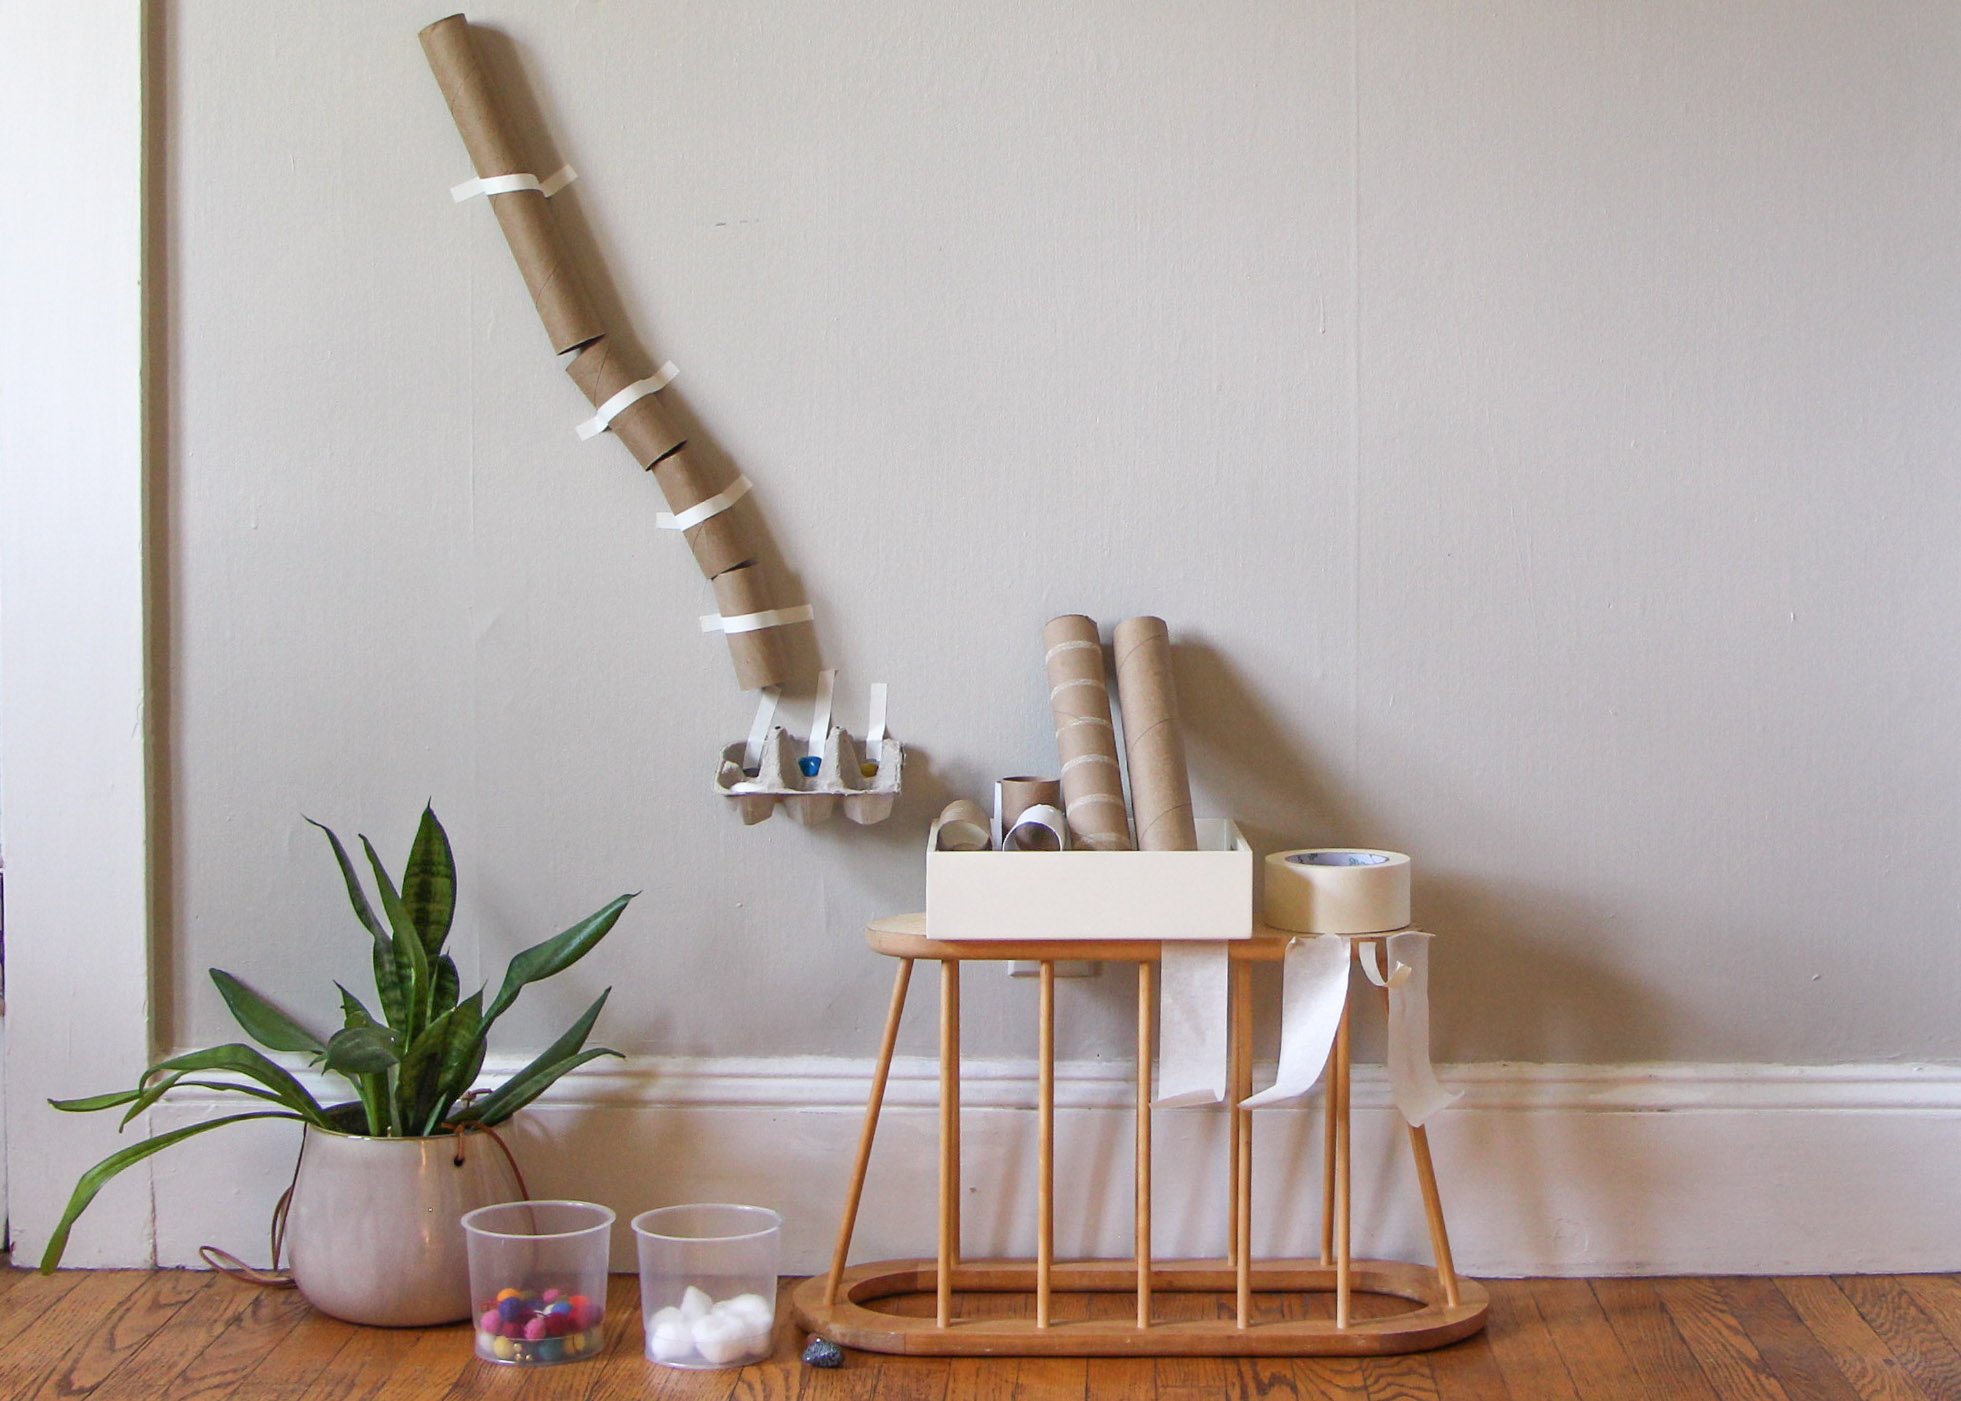 How to make a marble run using recycled materials